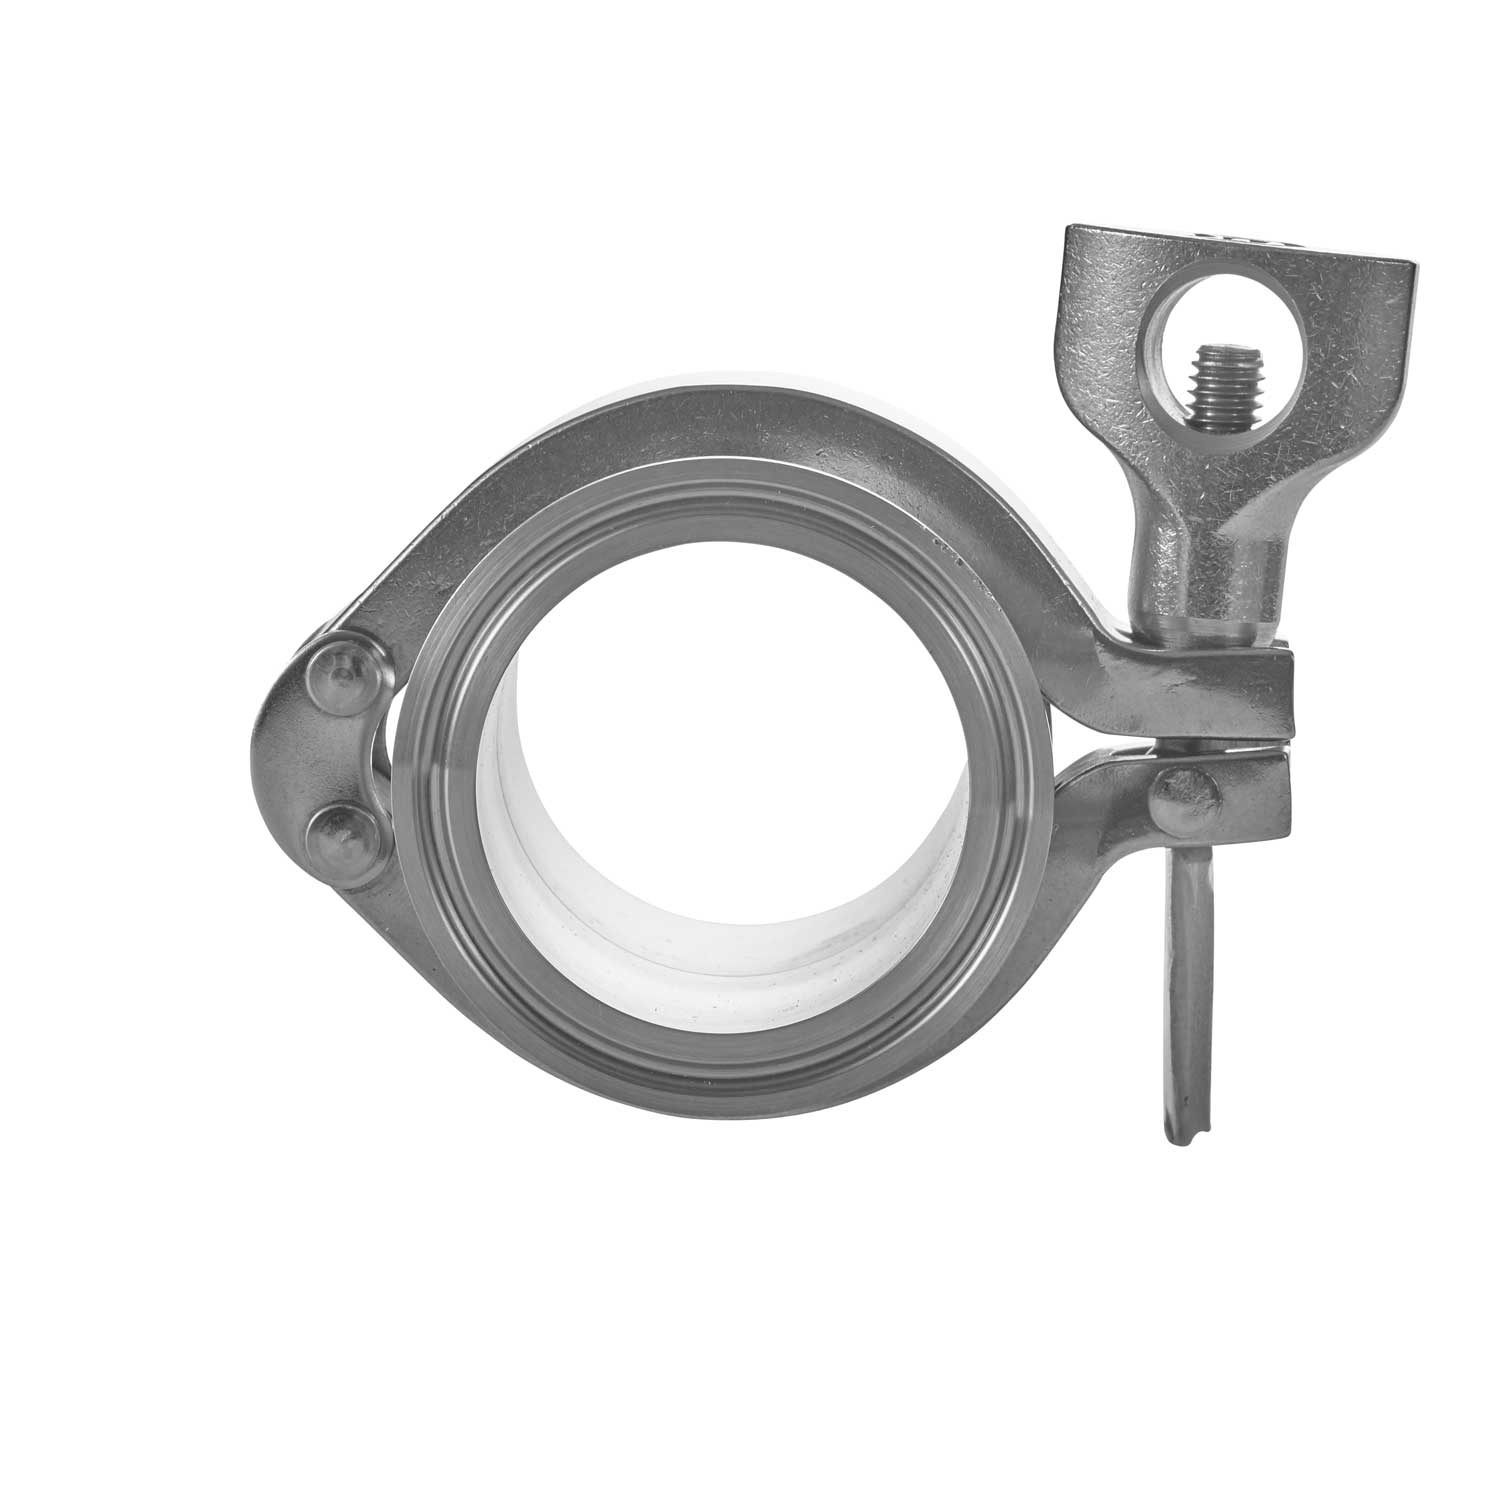 Sanitary Rupture Disc Holder Fitting Assembly